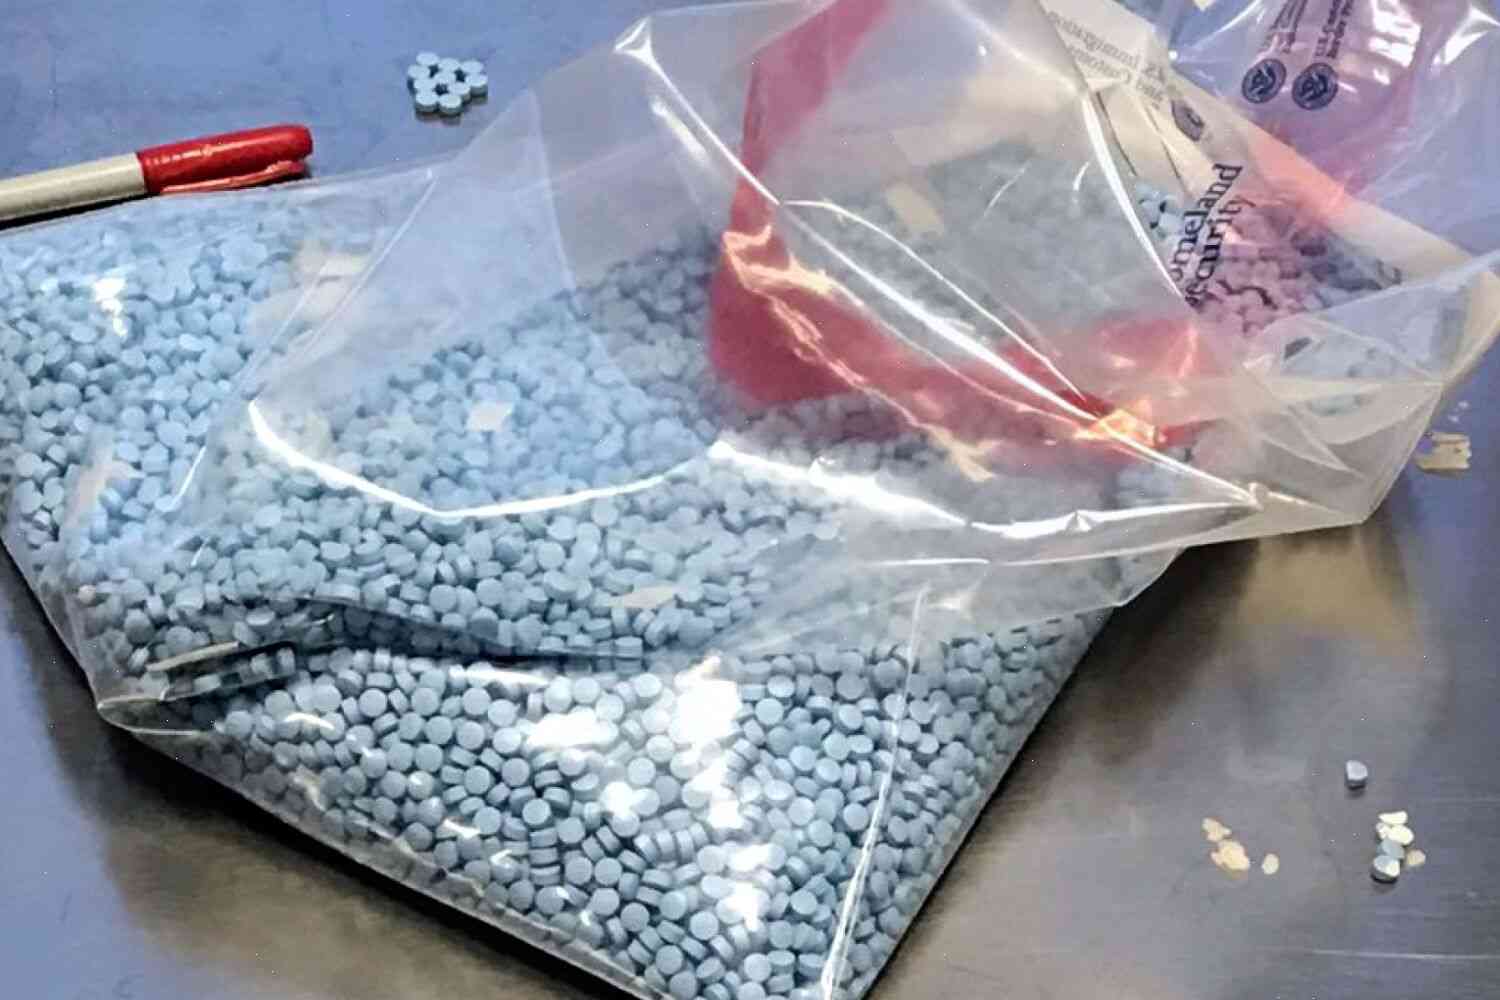 Fentanyl and Heroin Are Creating a Long Trail of Death